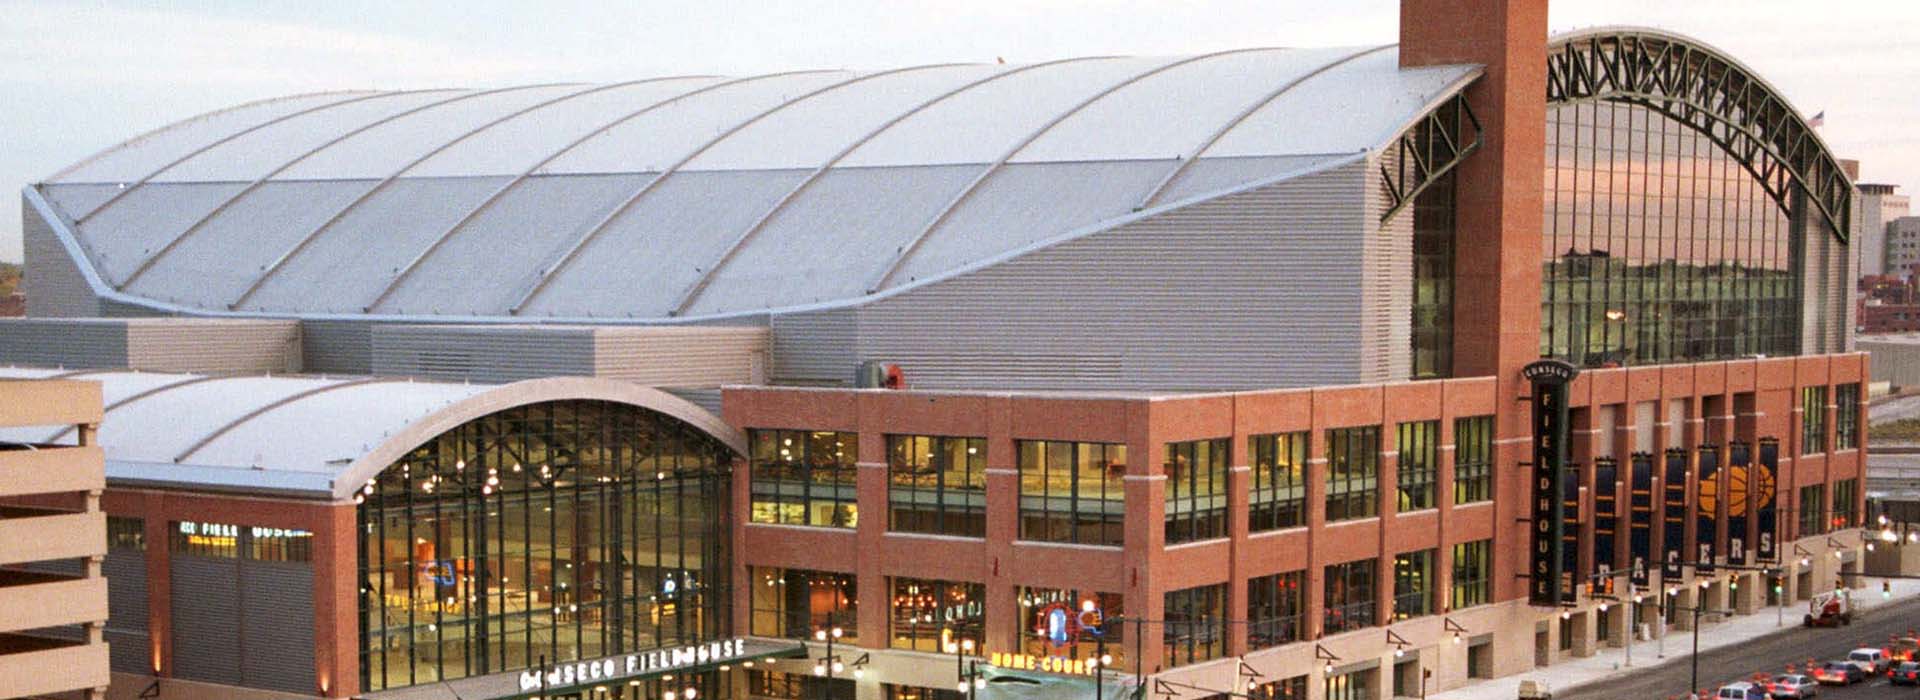 Indiana Pacers Fieldhouse